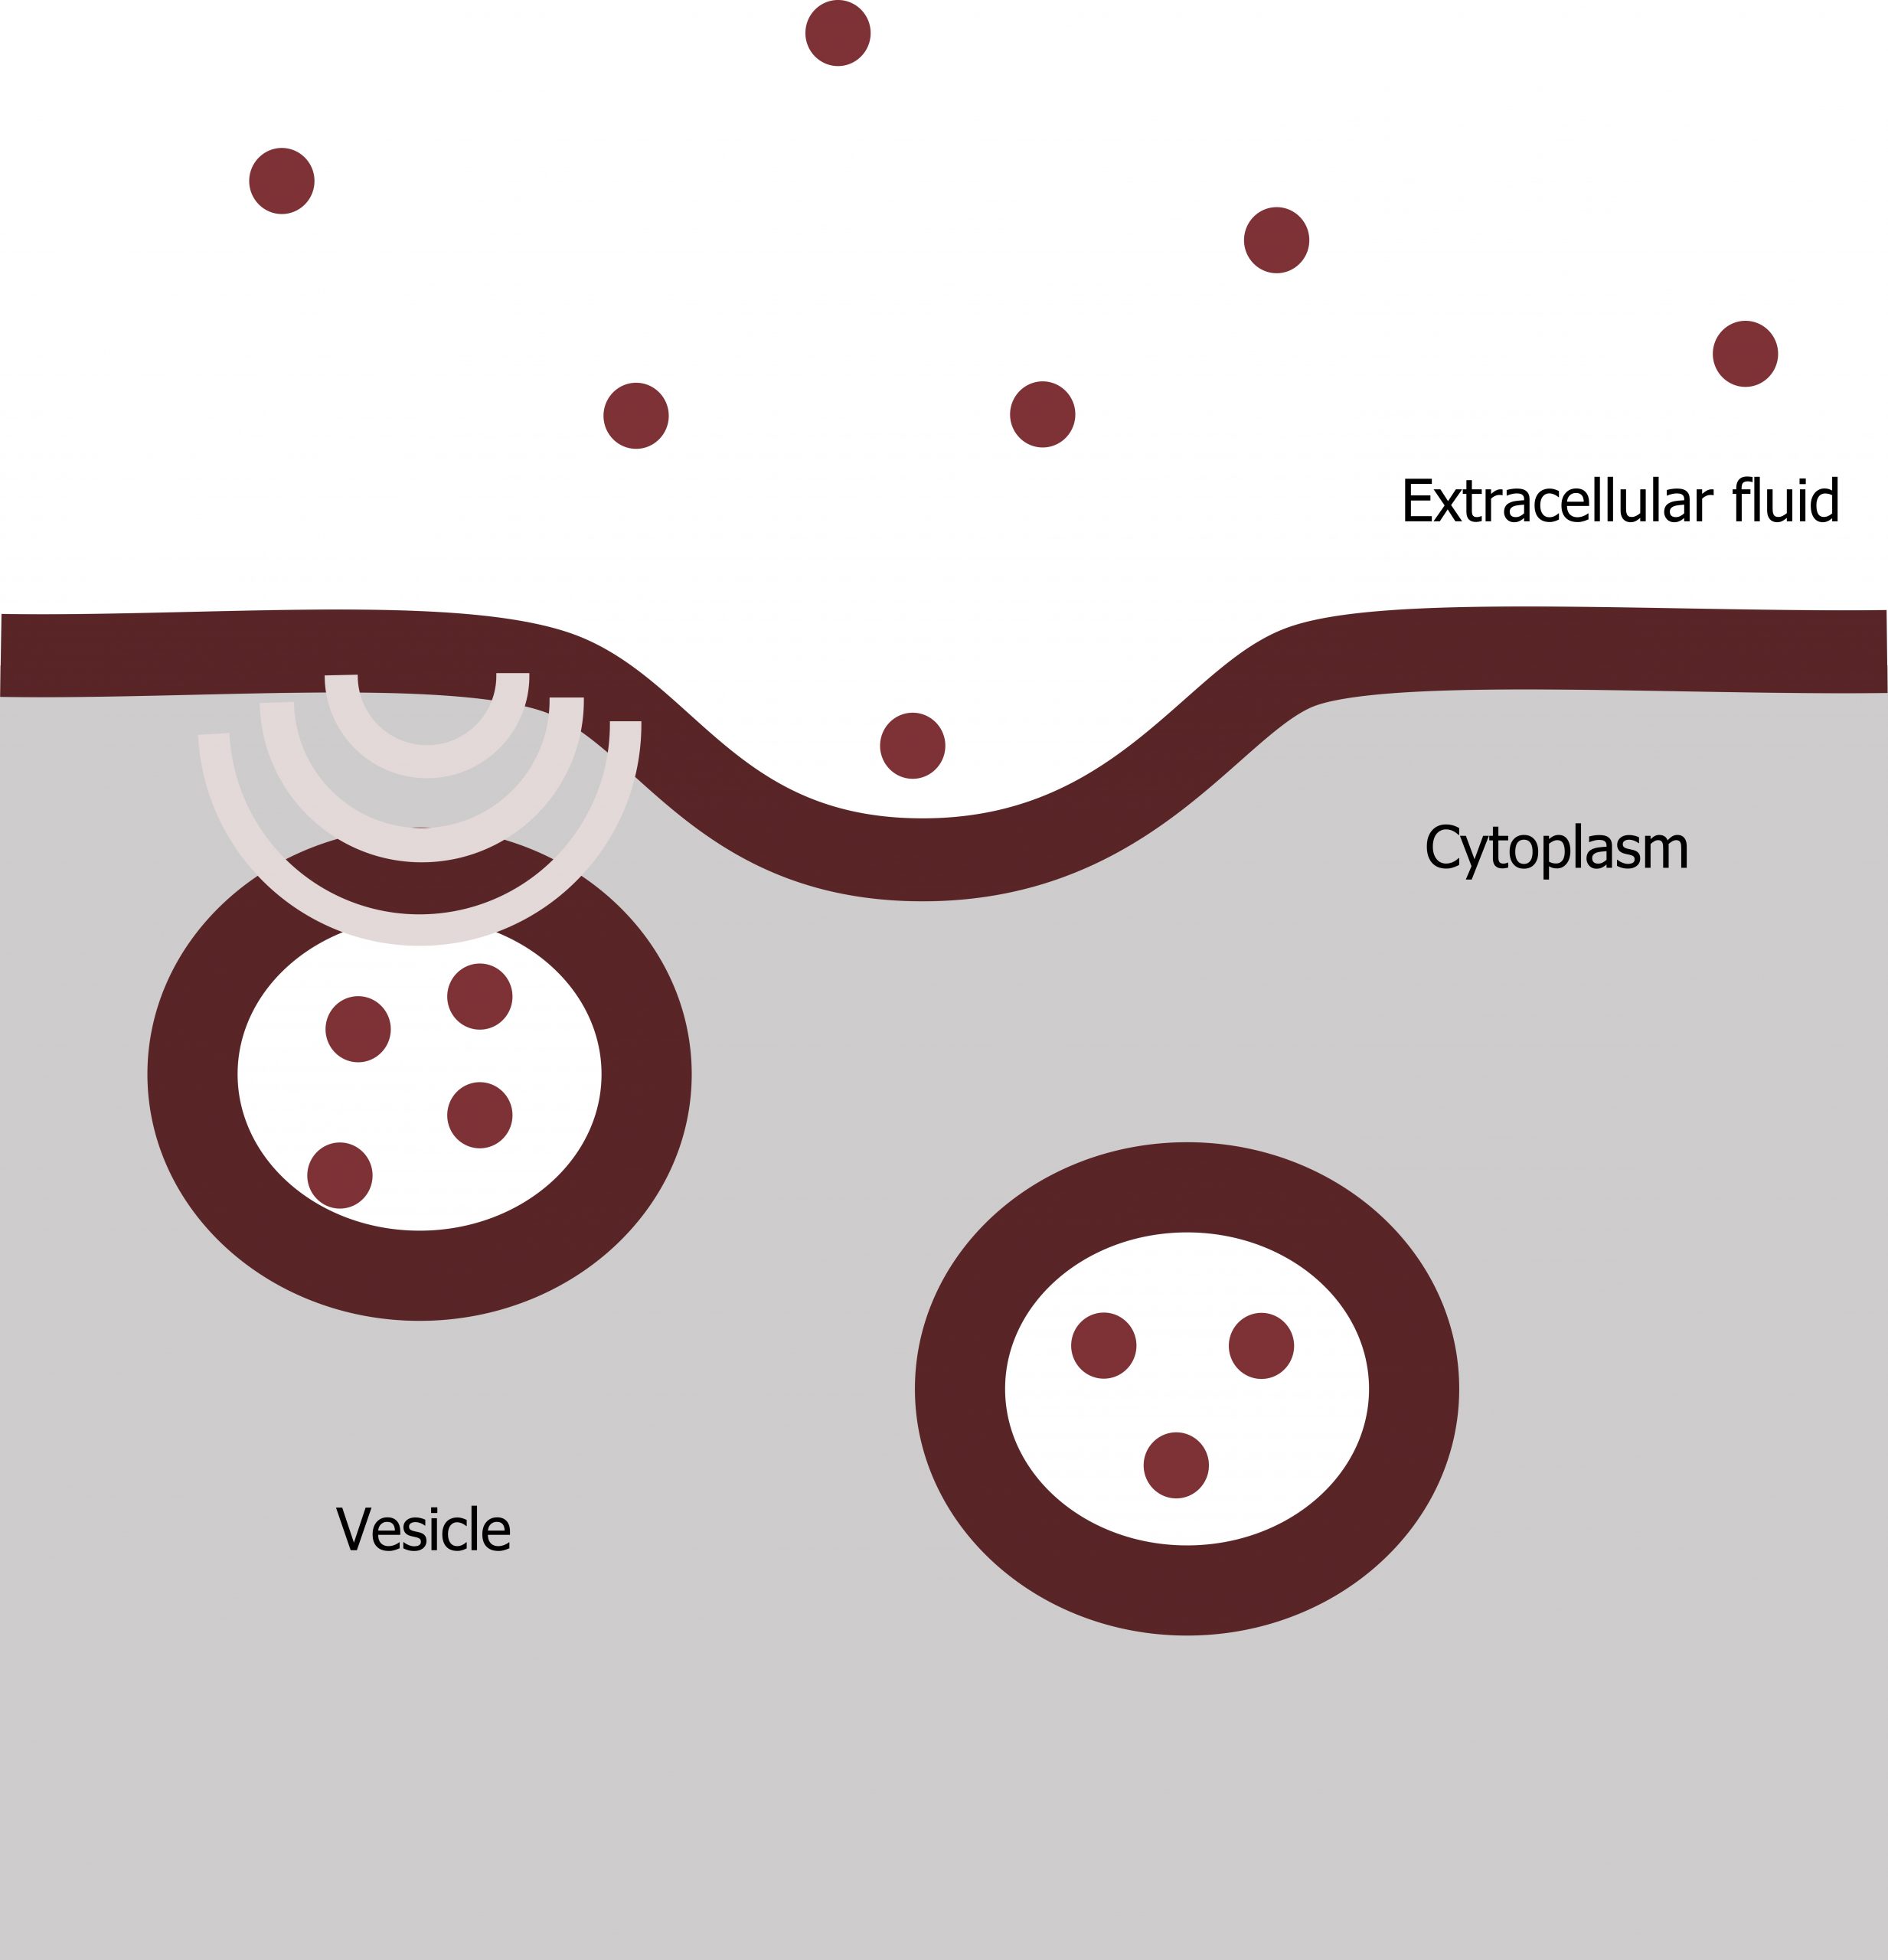 A vesicle containing particles fuses to the plasma membrane on the cytoplasmic side. The particles are released into the extracellular fluid.